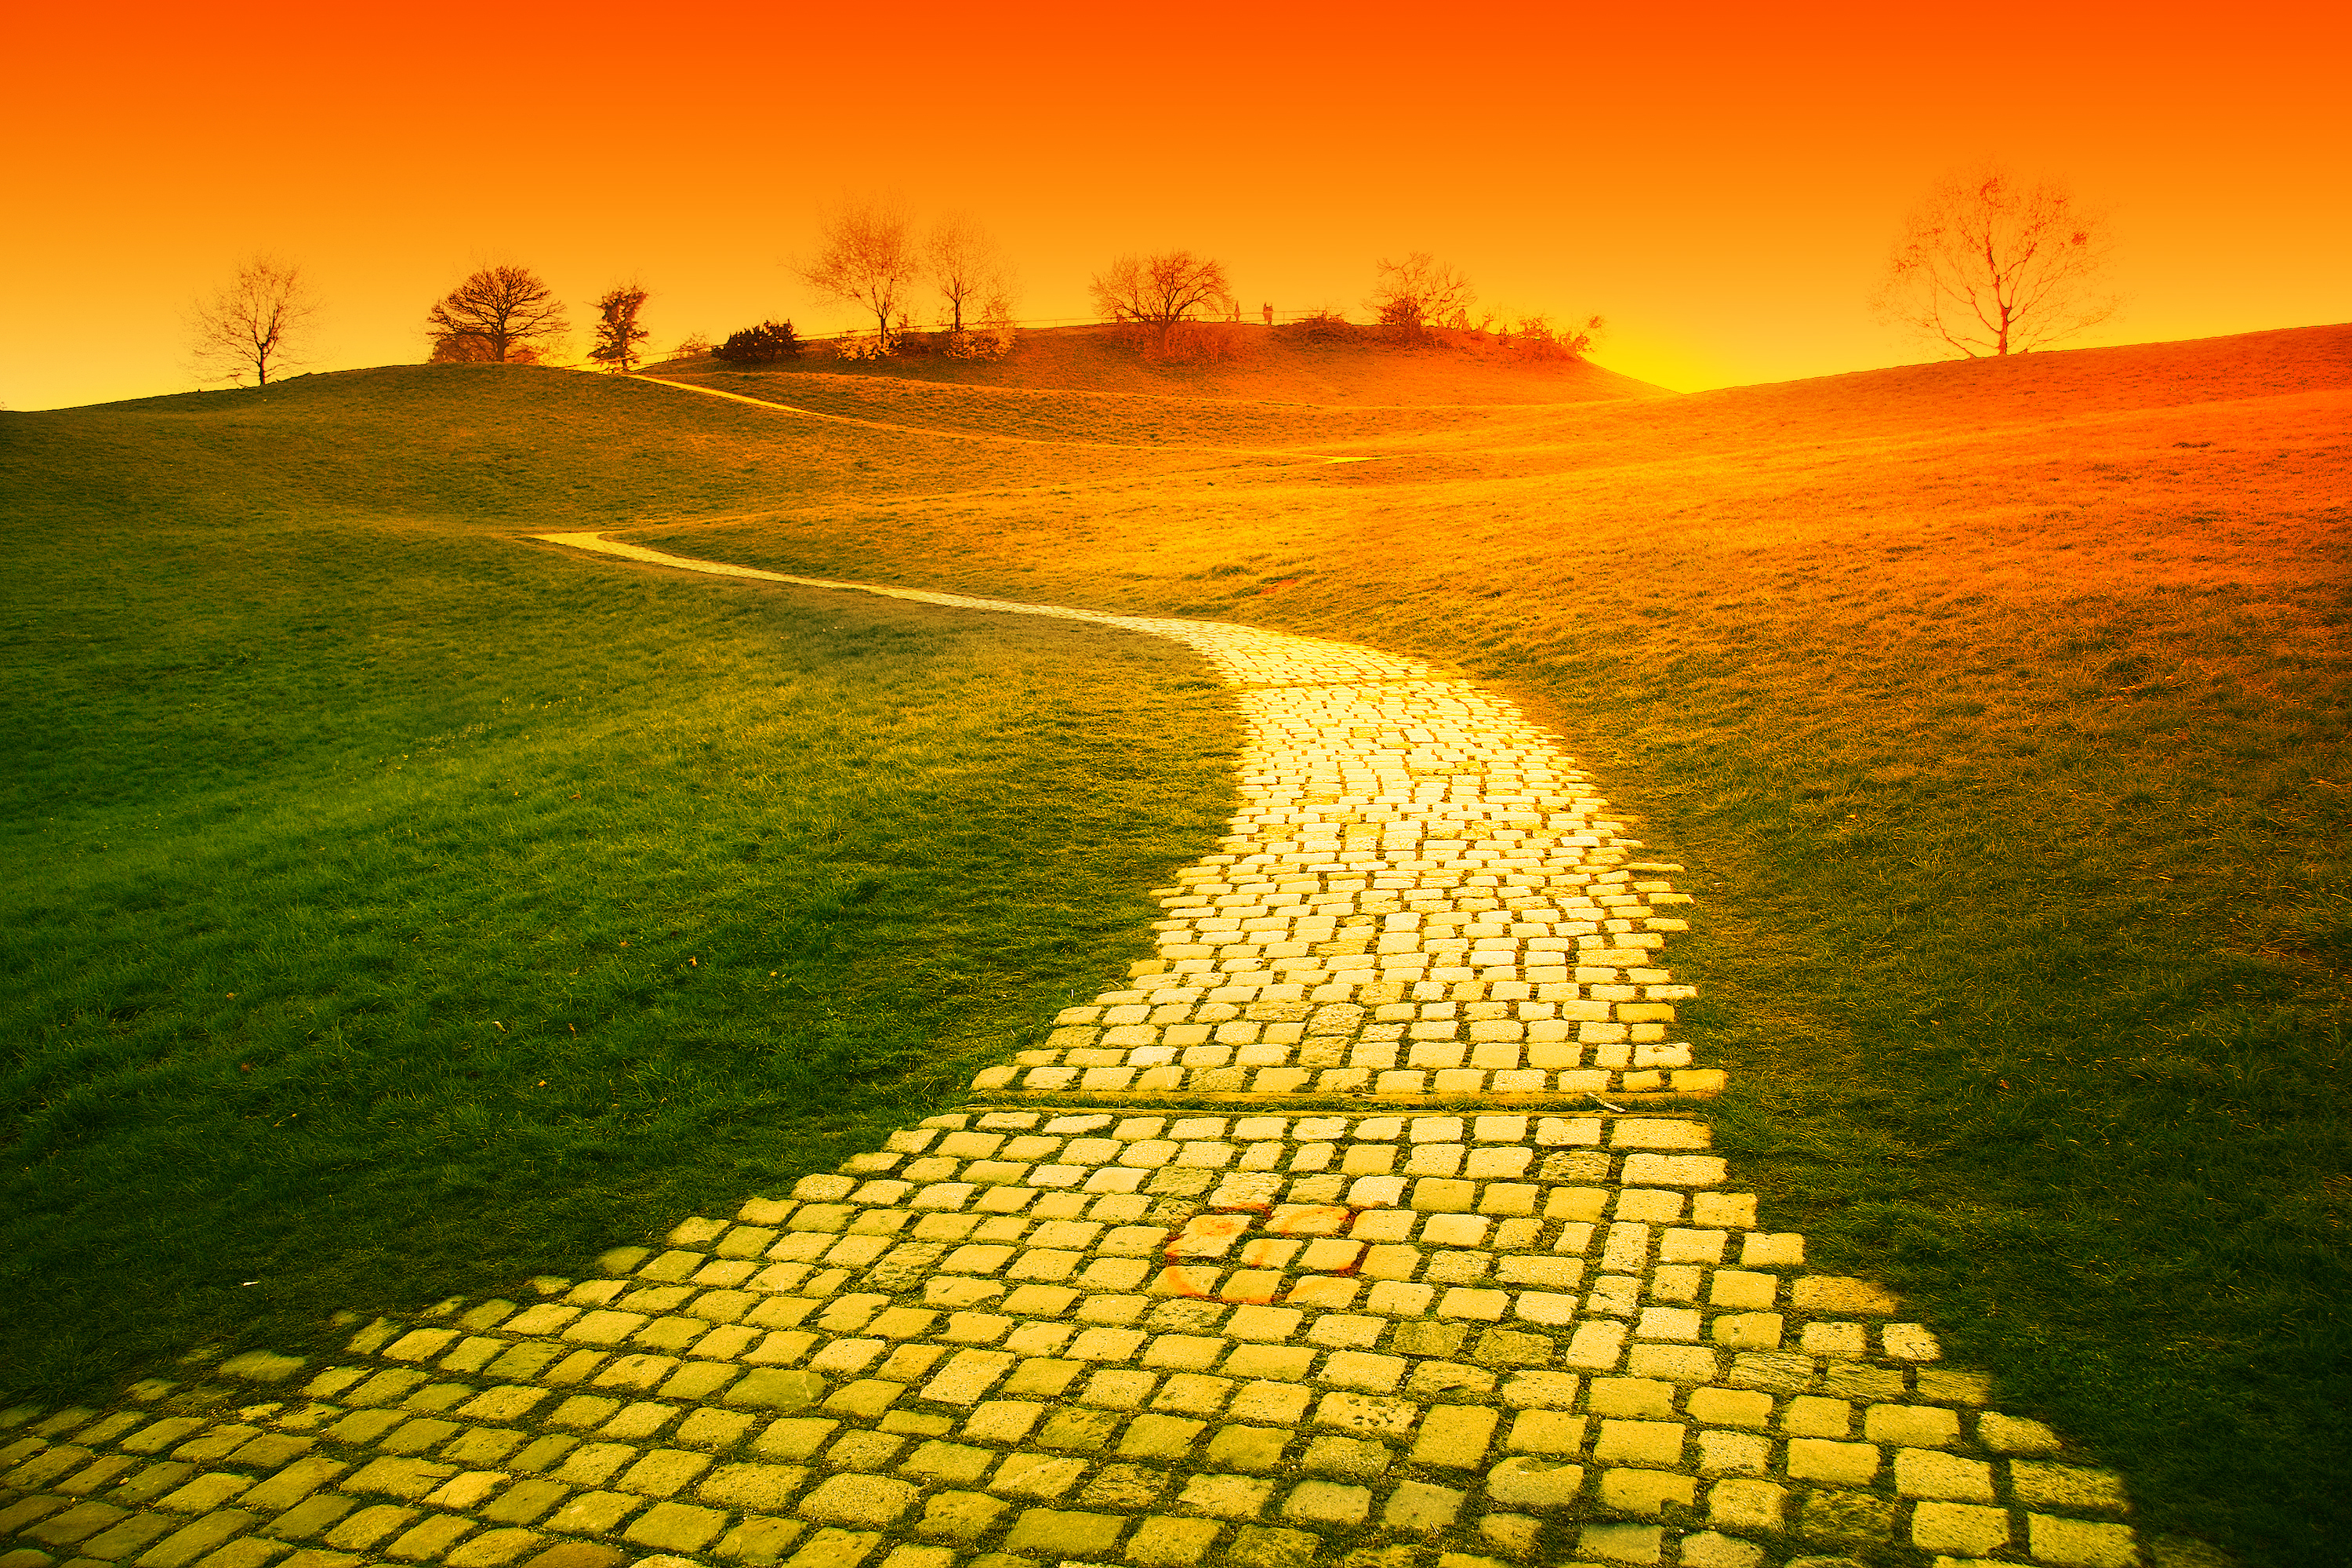 Image of the Yellow brick road used for editorial purposes only.